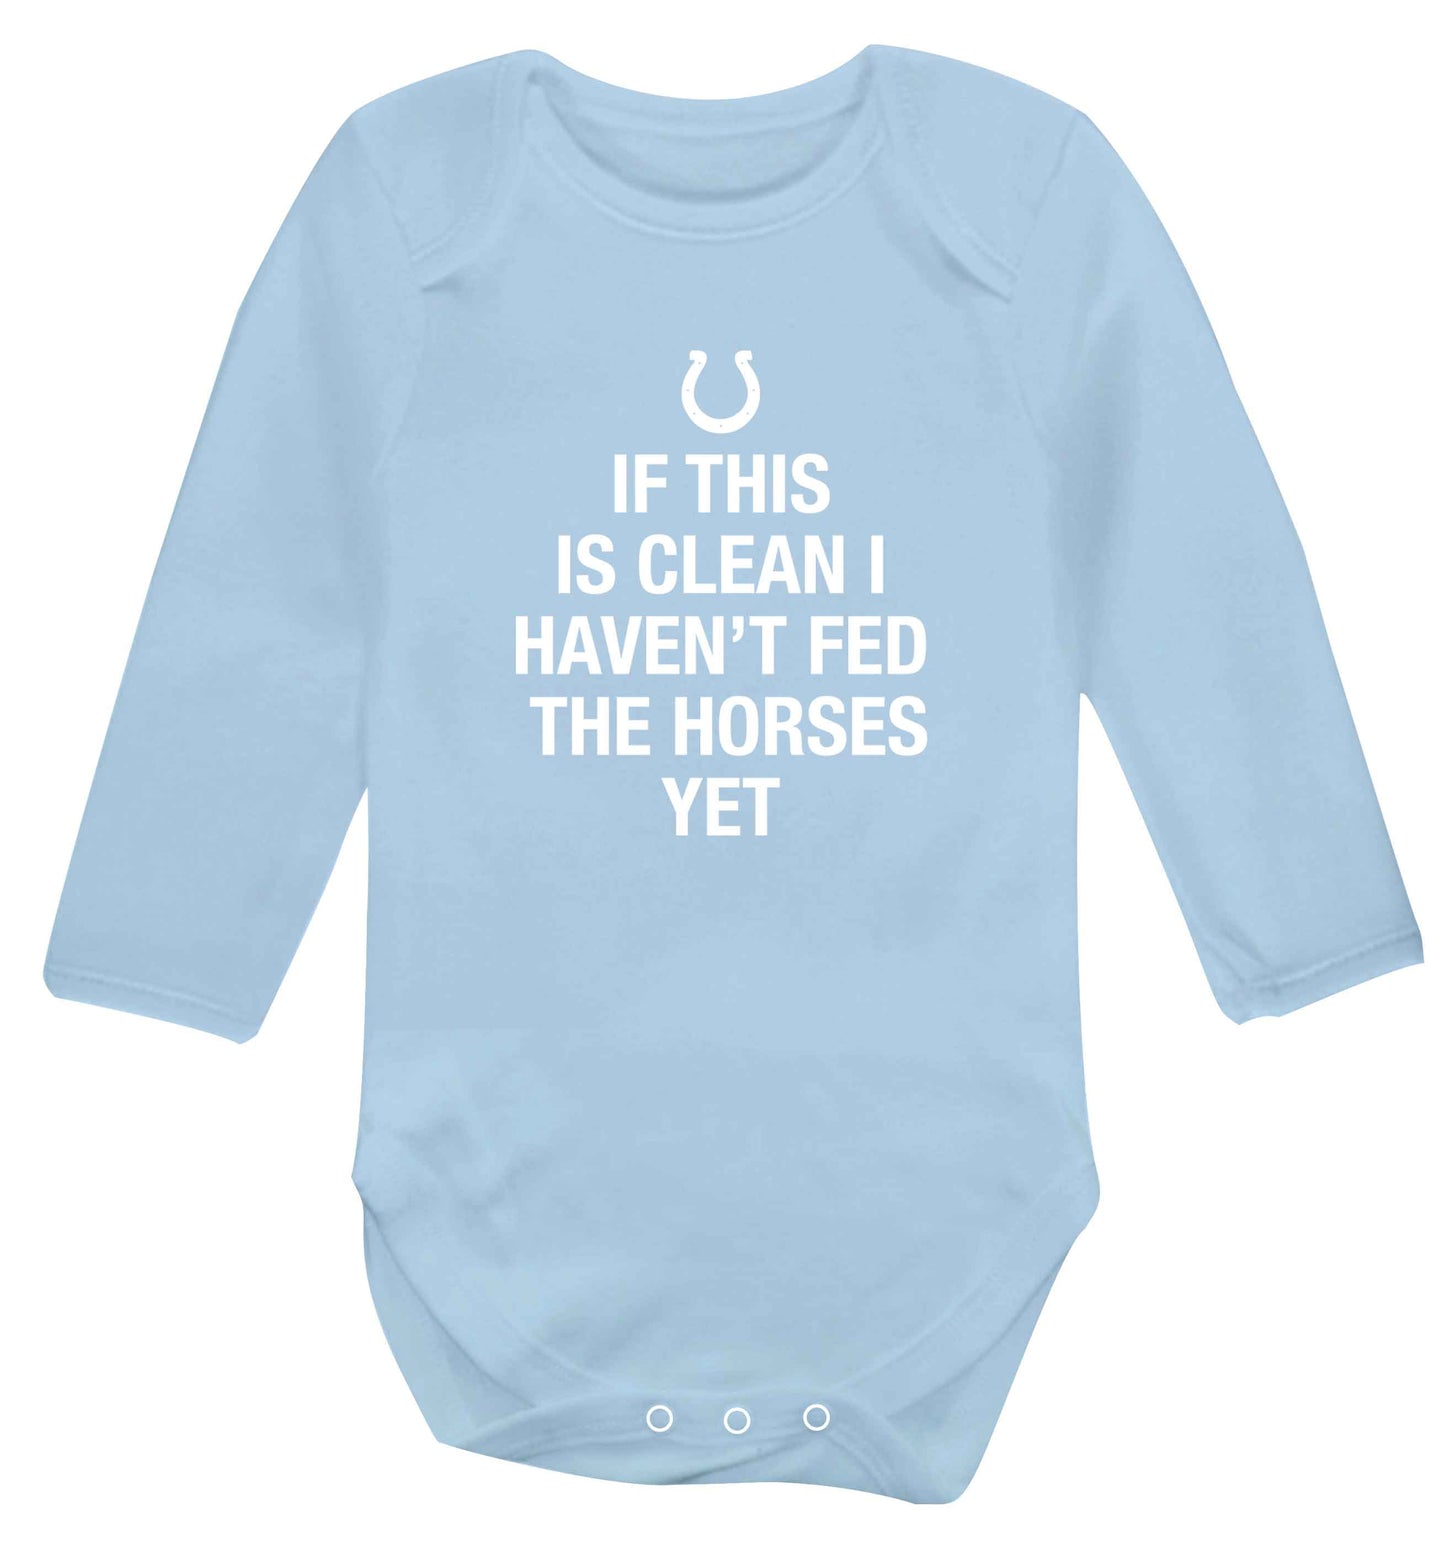 If this isn't clean I haven't fed the horses yet baby vest long sleeved pale blue 6-12 months